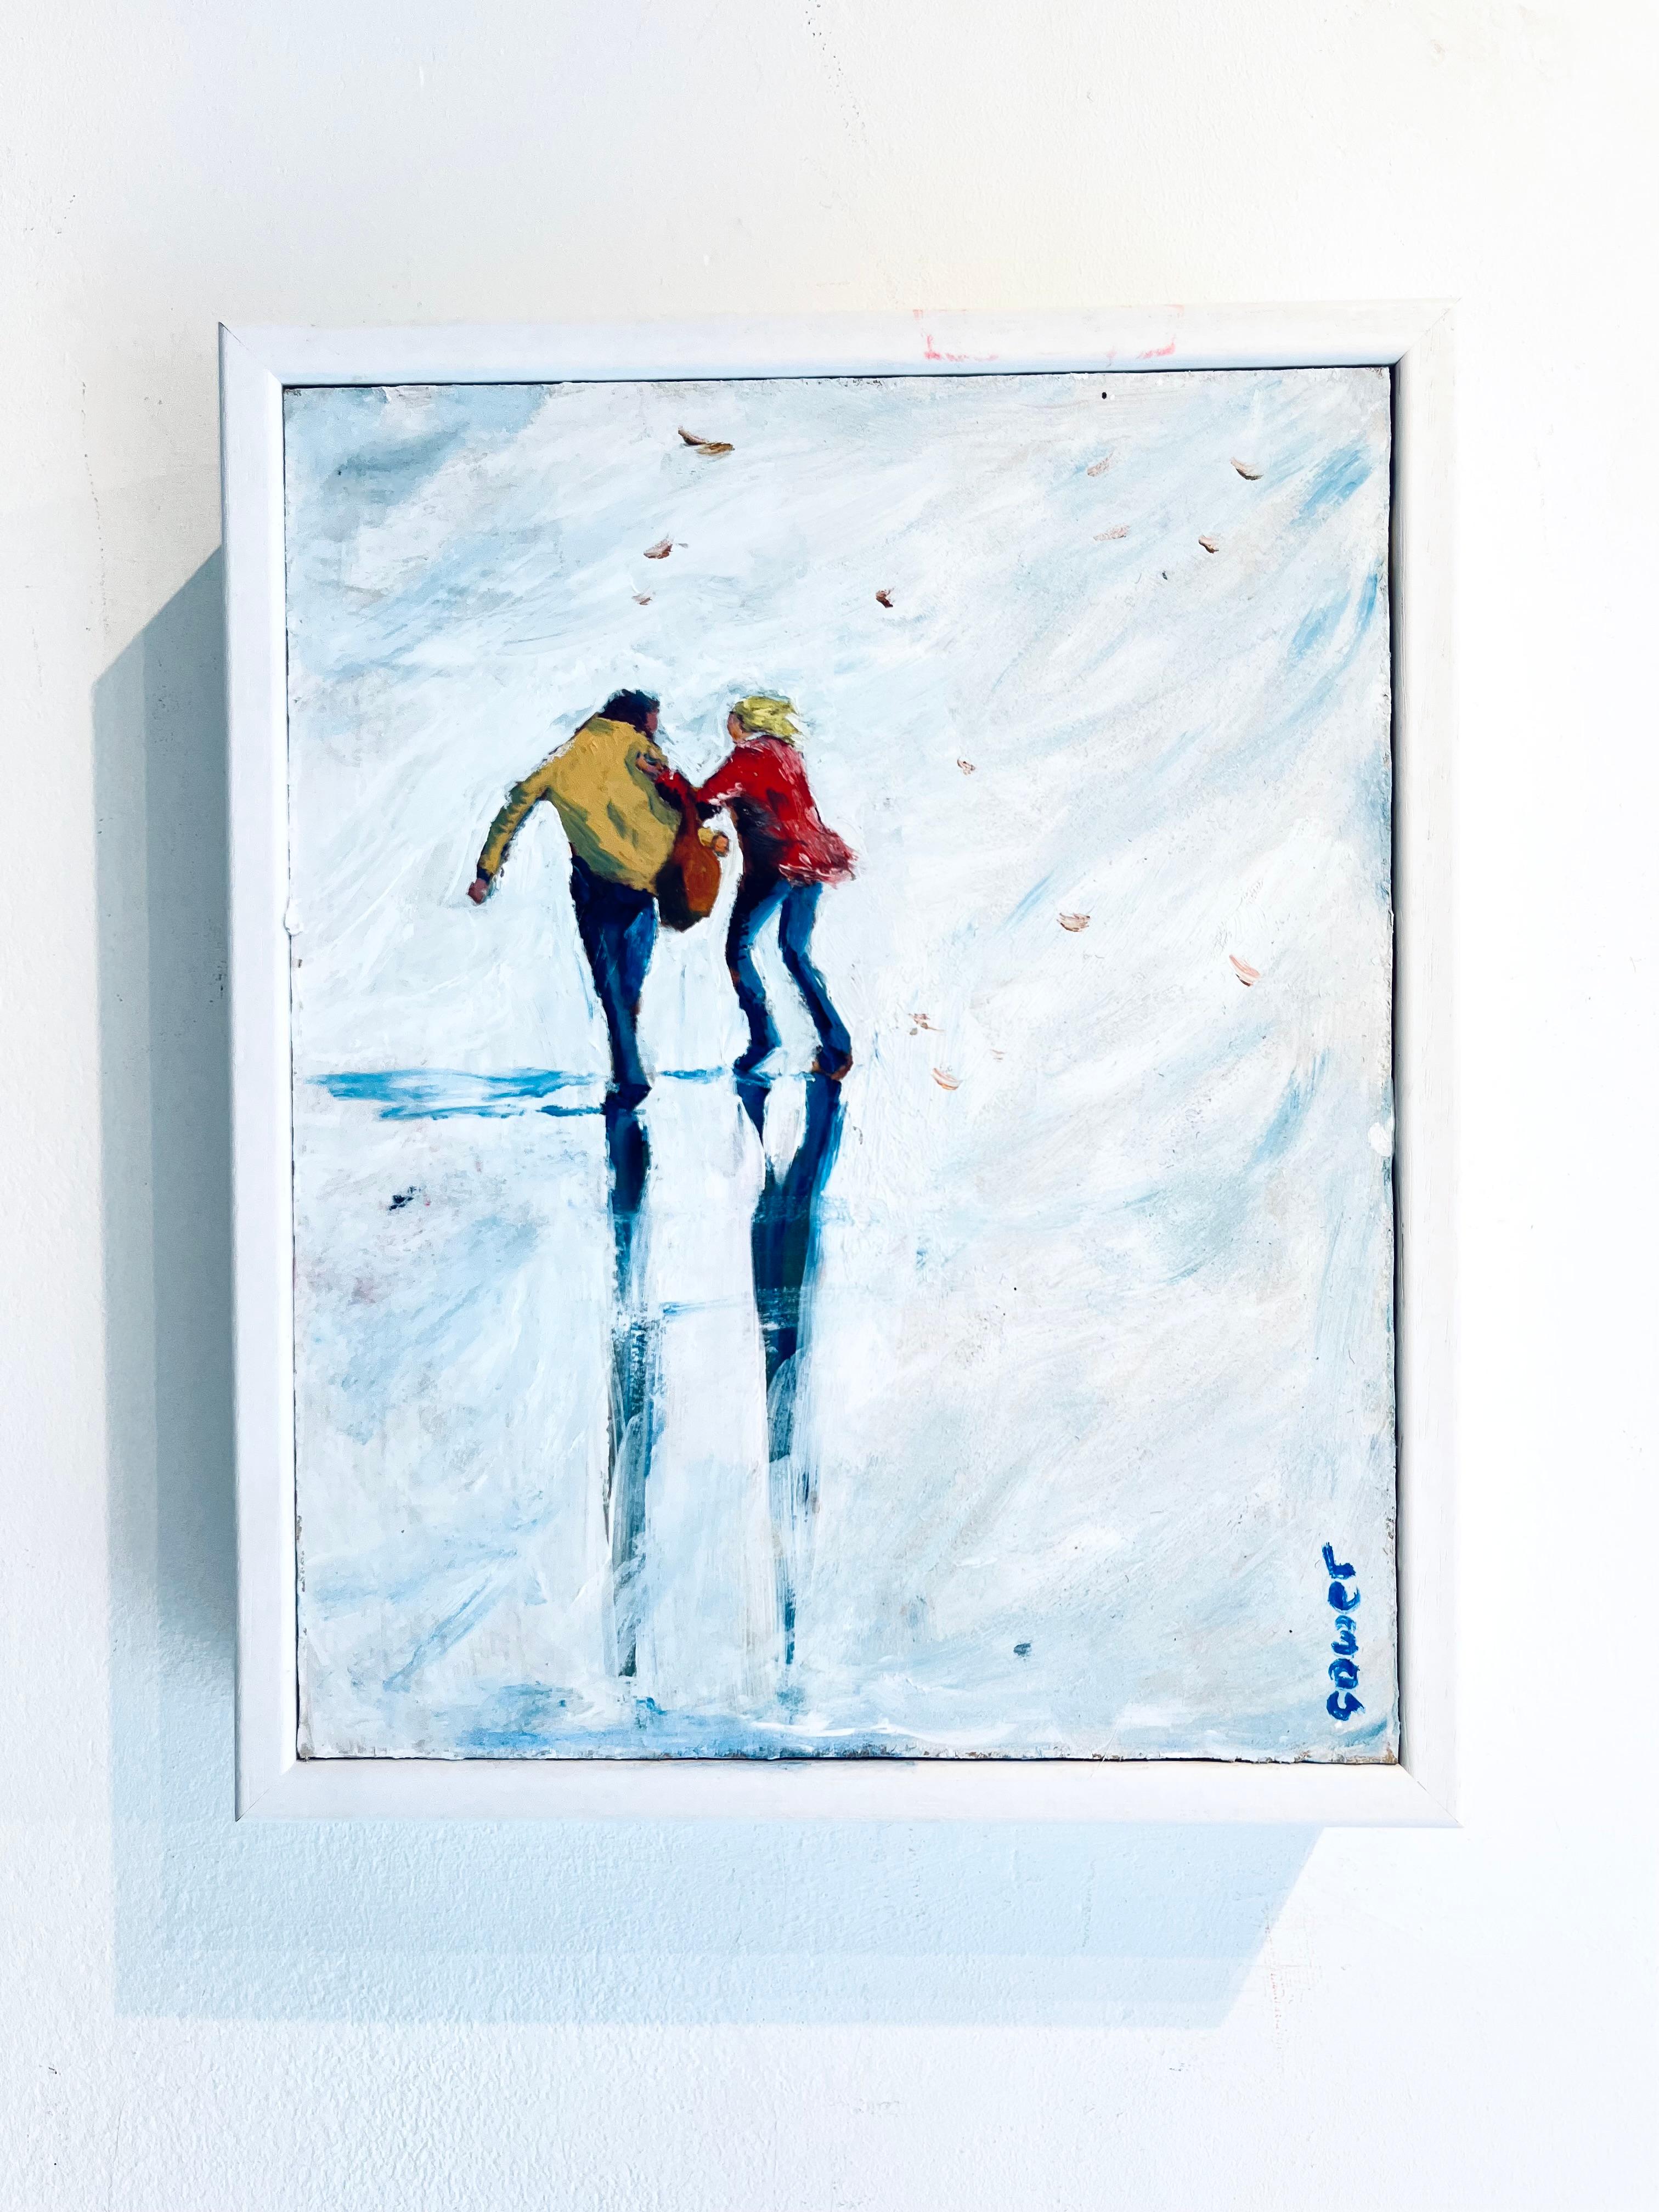 Windy Day-original impressionism figurative minimalist painting-contemporary Art - Painting by Richard Gower